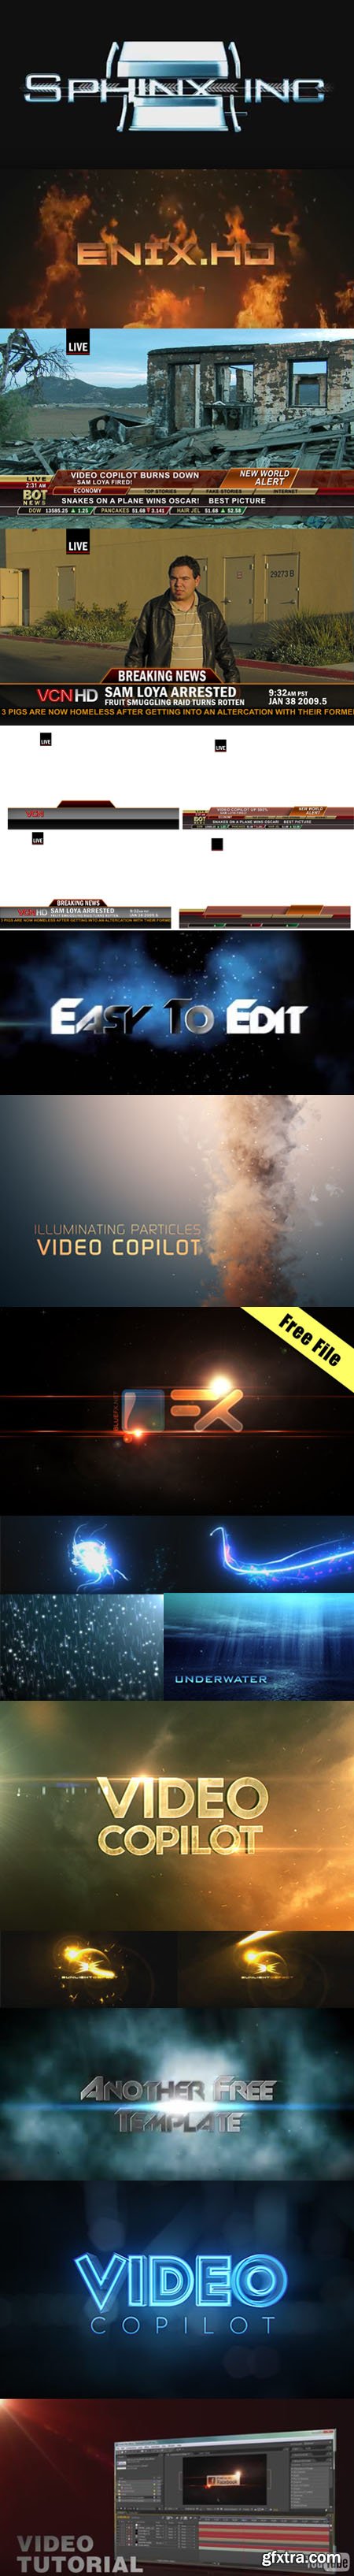 after effects cs3 template files free download